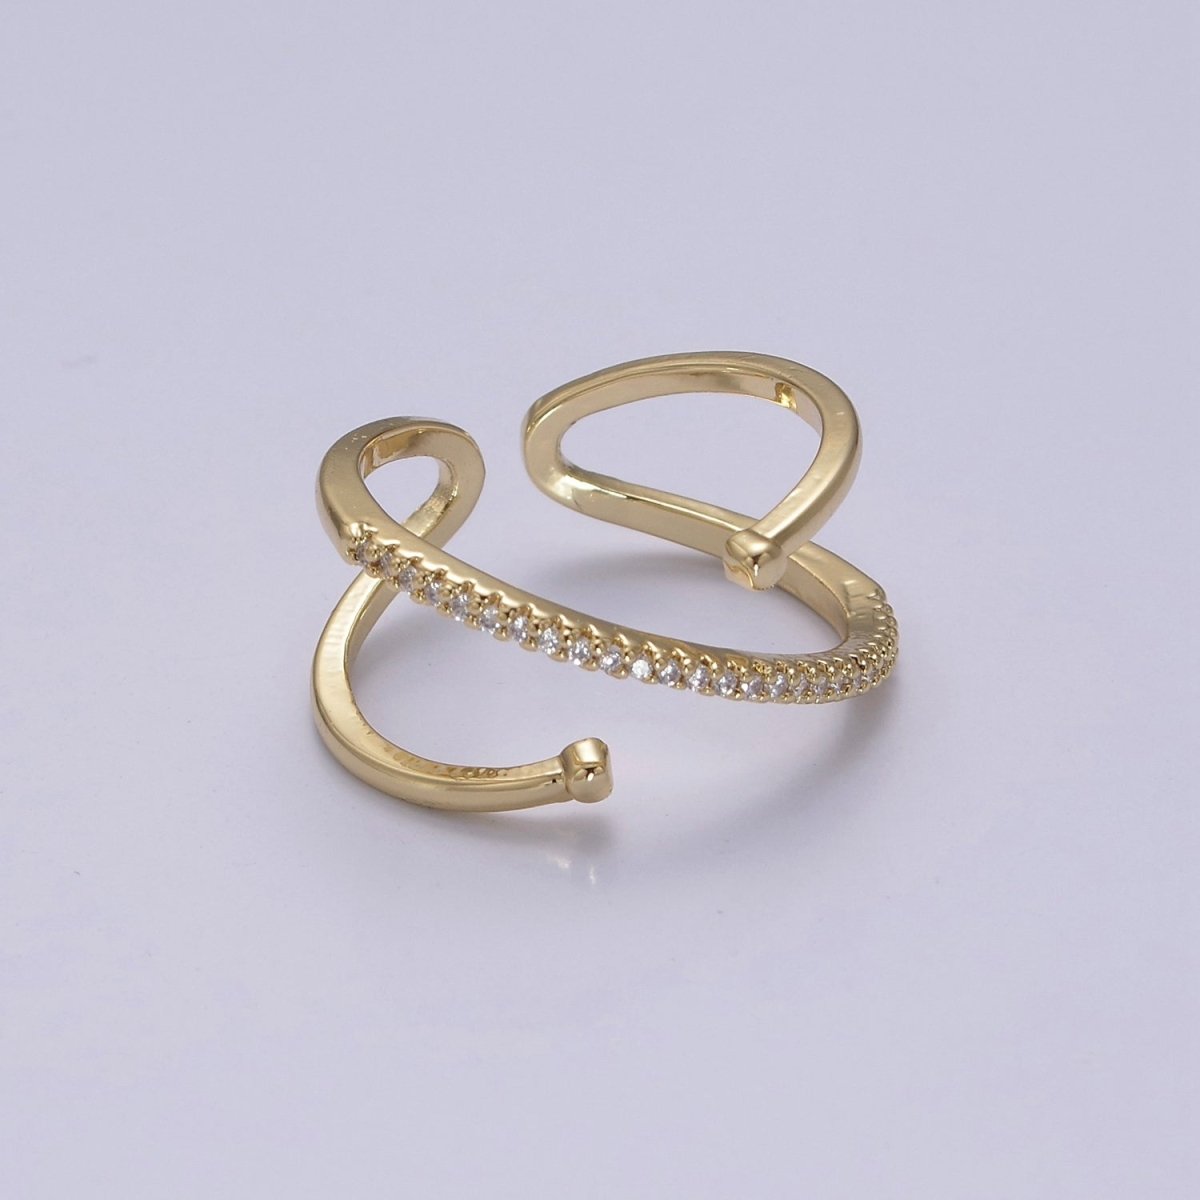 Criss Cross Ring - Double Band Ring - Gold Ring women Adjustable CZ Ring S-467 ~ S-470 - DLUXCA